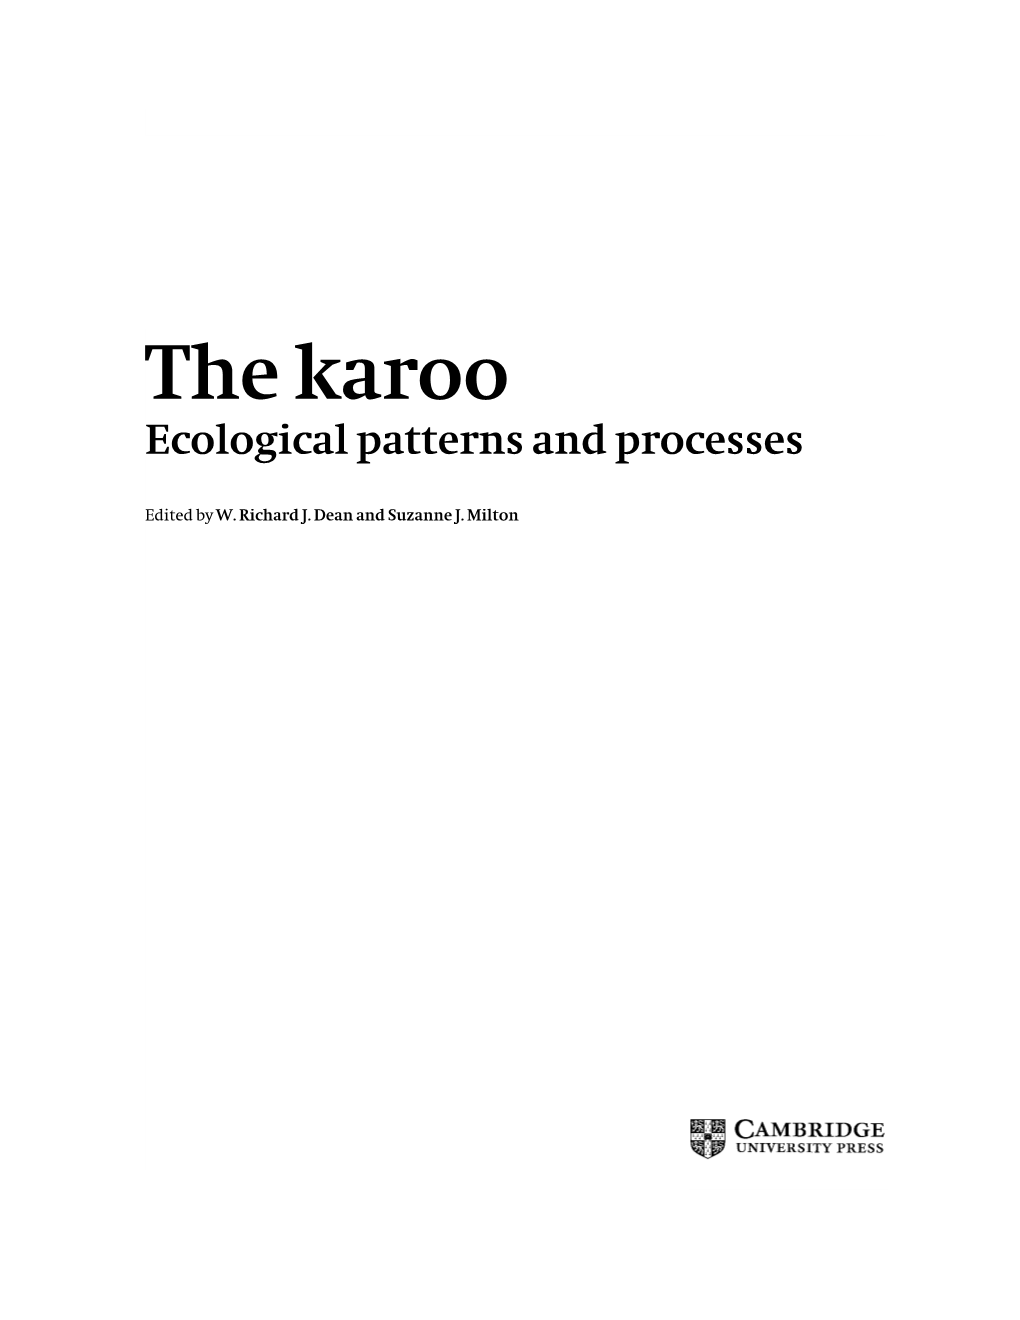 The Karoo Ecological Patterns and Processes